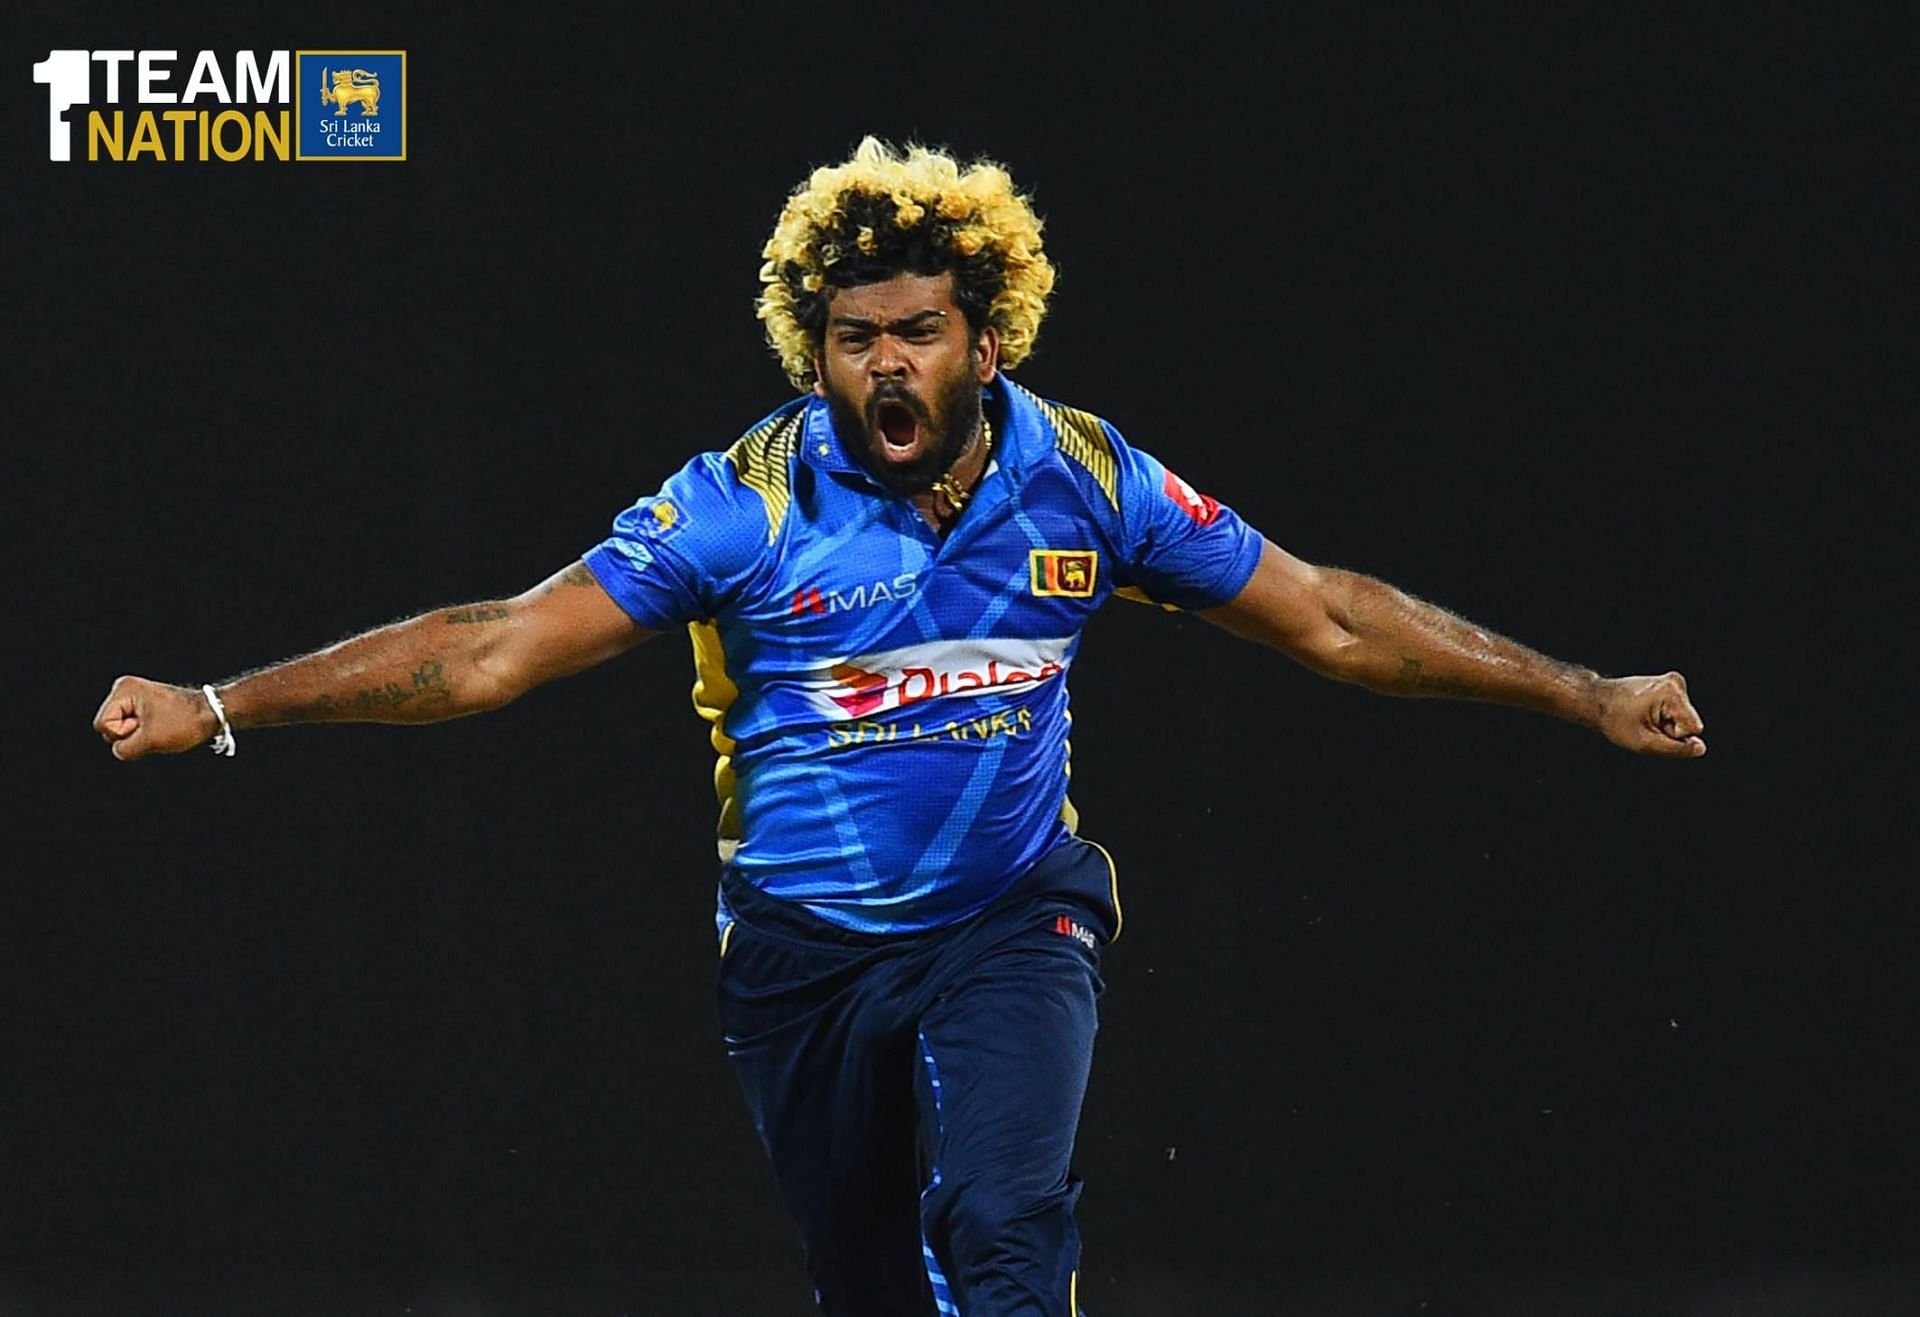 Malinga was unique in every aspect, be it his bowling action or hairstyle. Pic: Twitter/@OfficialSLC